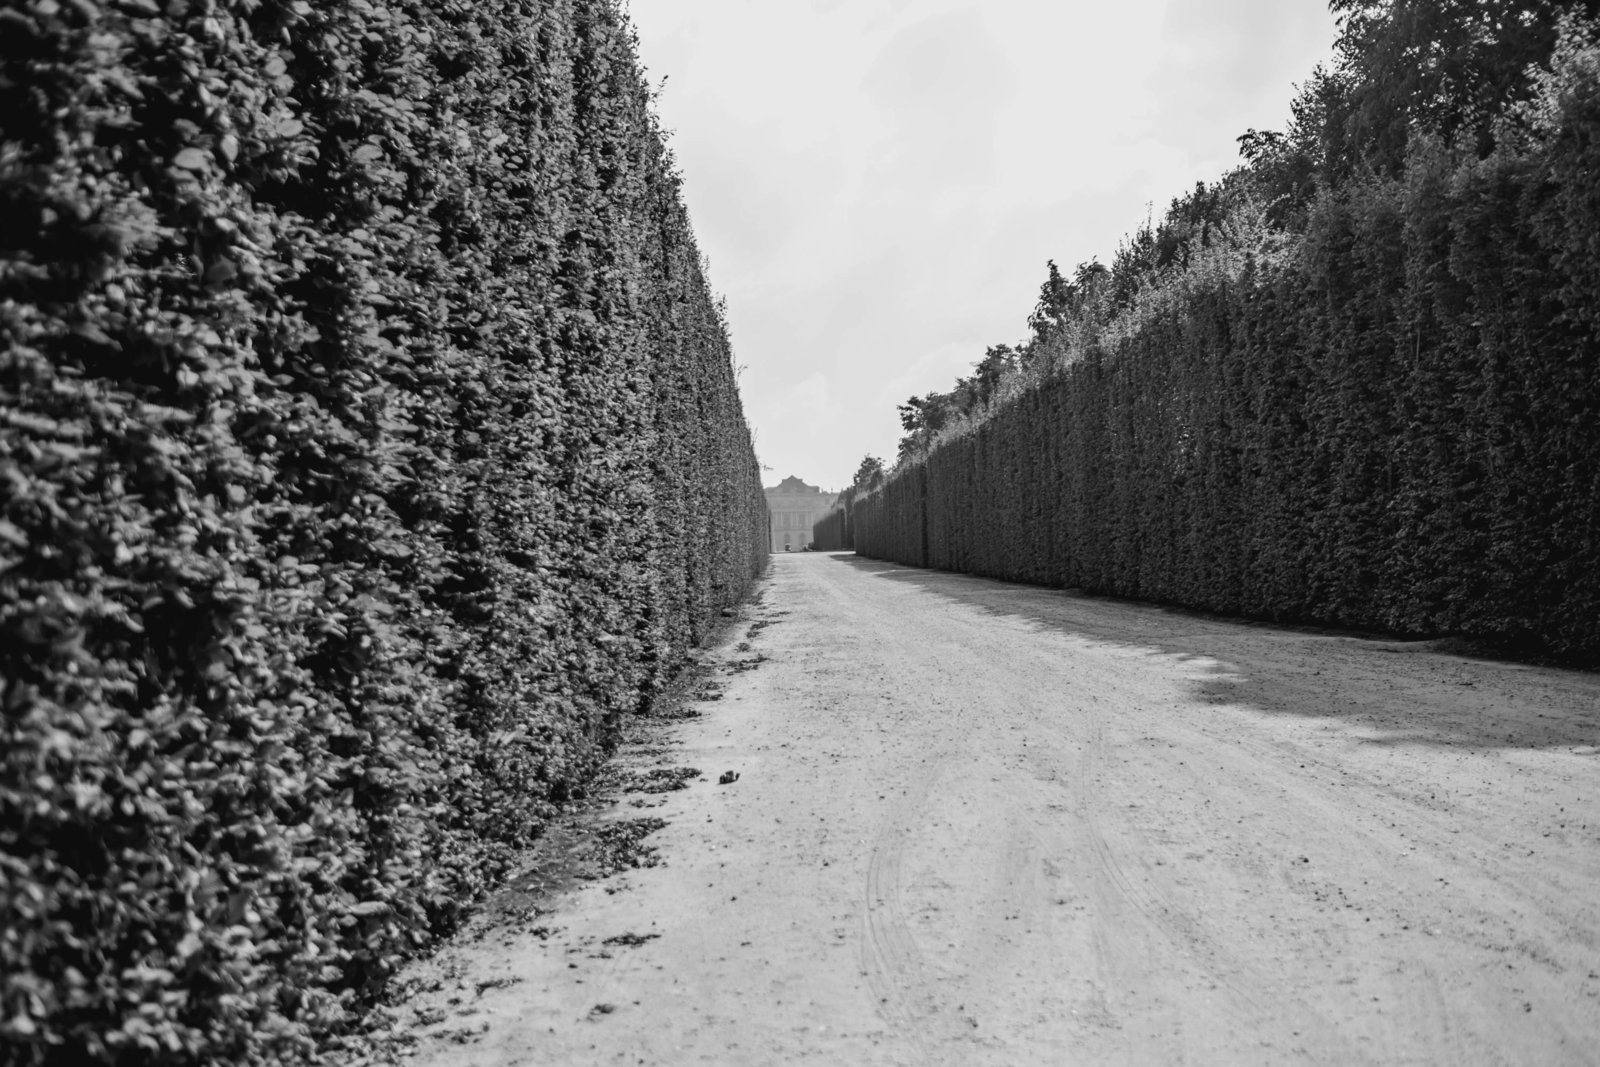 hedge-path-palace-versailles-france-travel-destination-kate-timbers-photography-1664